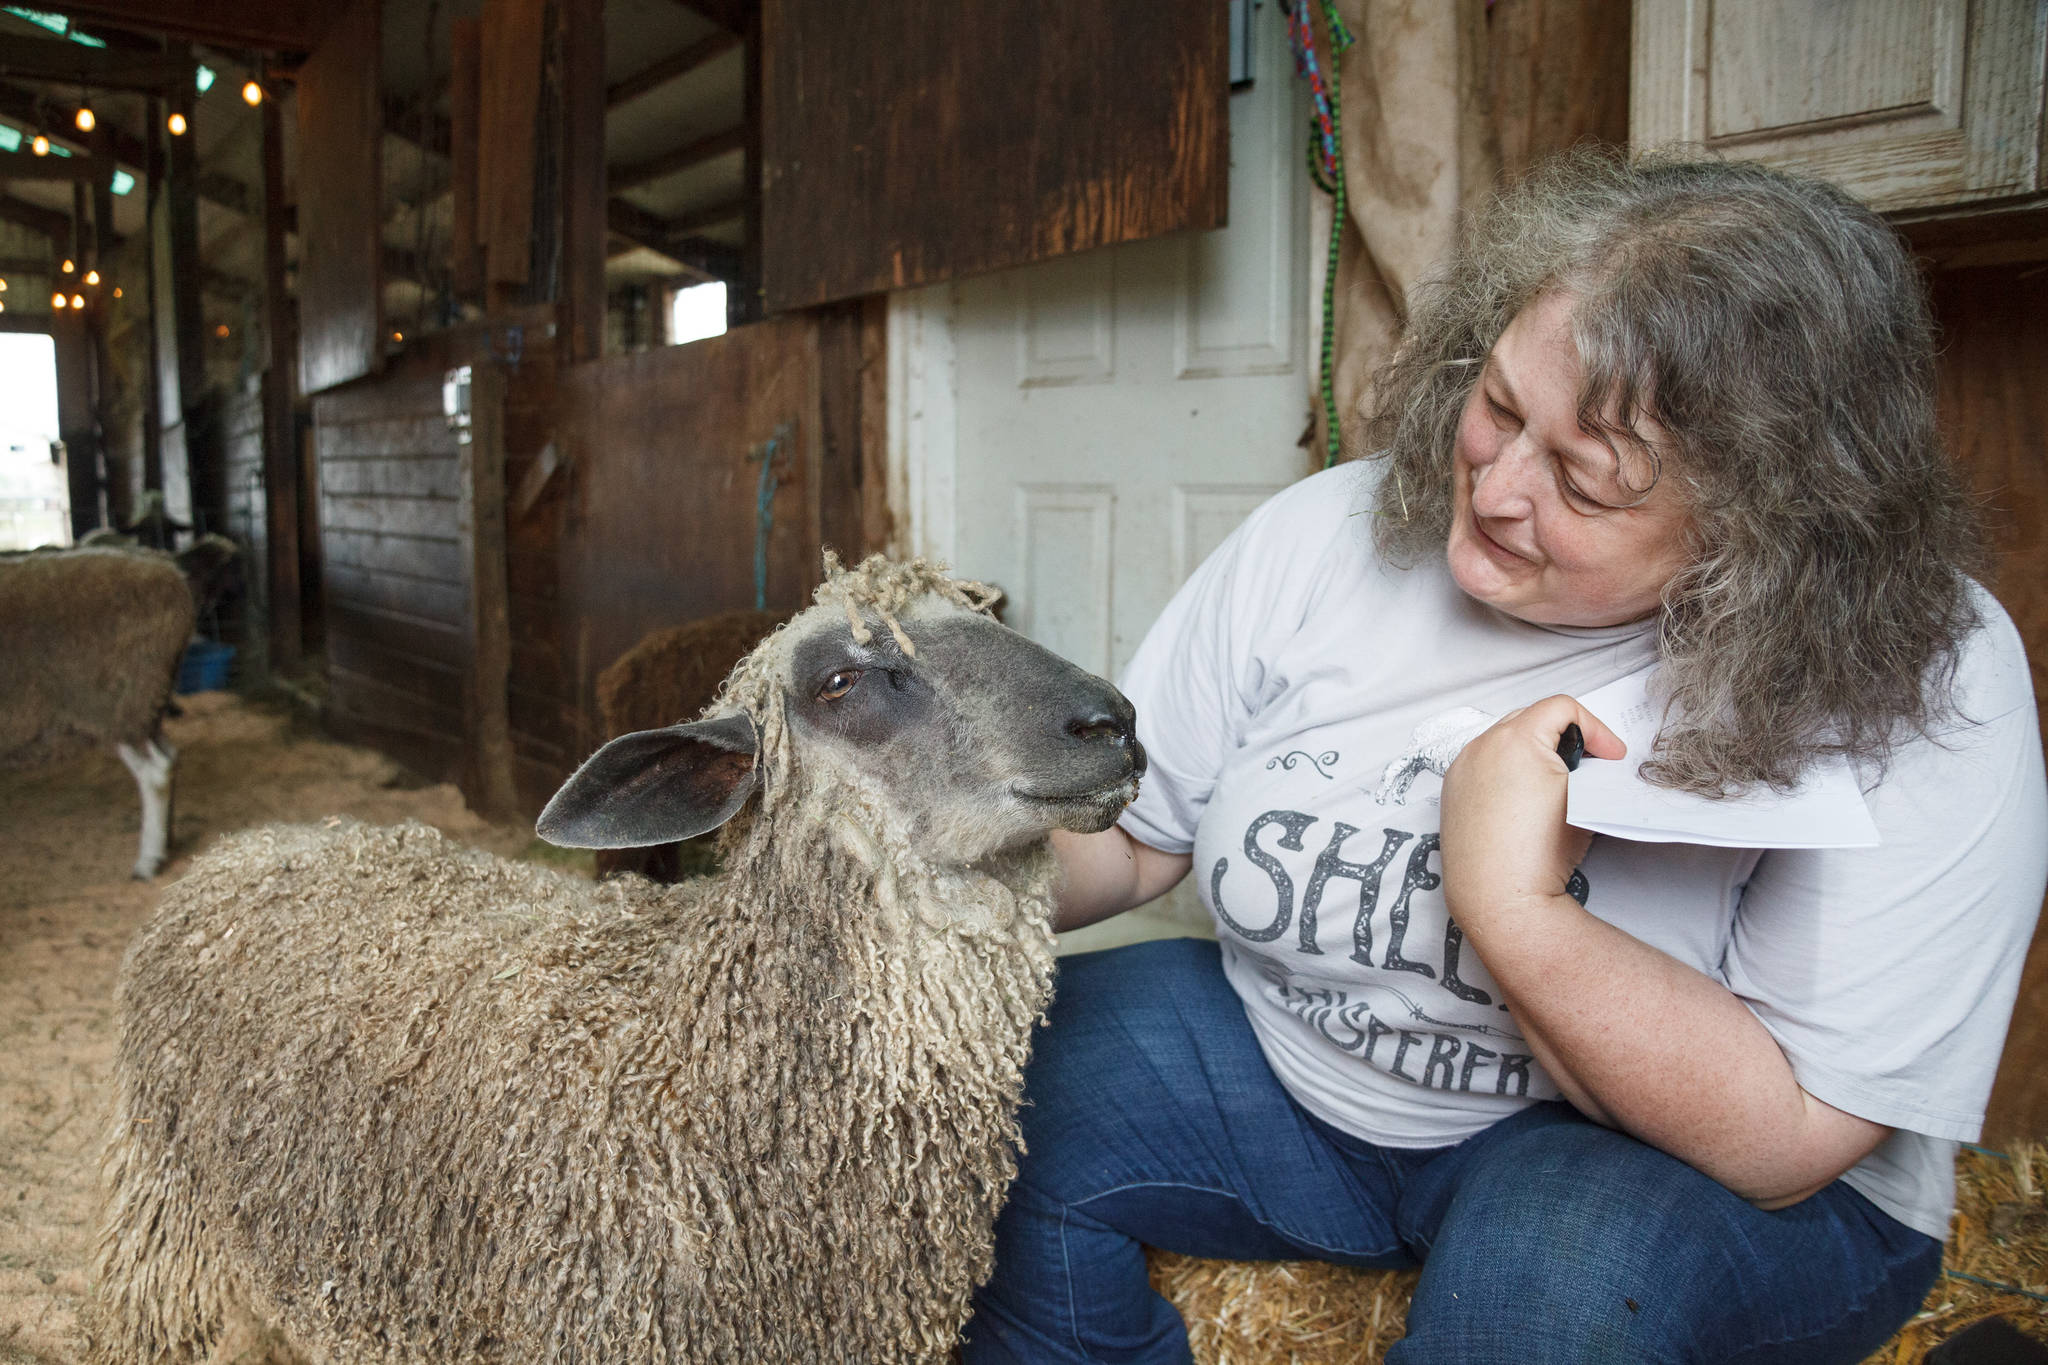 Carolynn Bernard, owner and operator of Bless Ewe Sheep Company pets one of the sheep on her farm in Enumclaw on Aug. 17, 2021. Photo by Henry Stewart-Wood/Sound Publishing